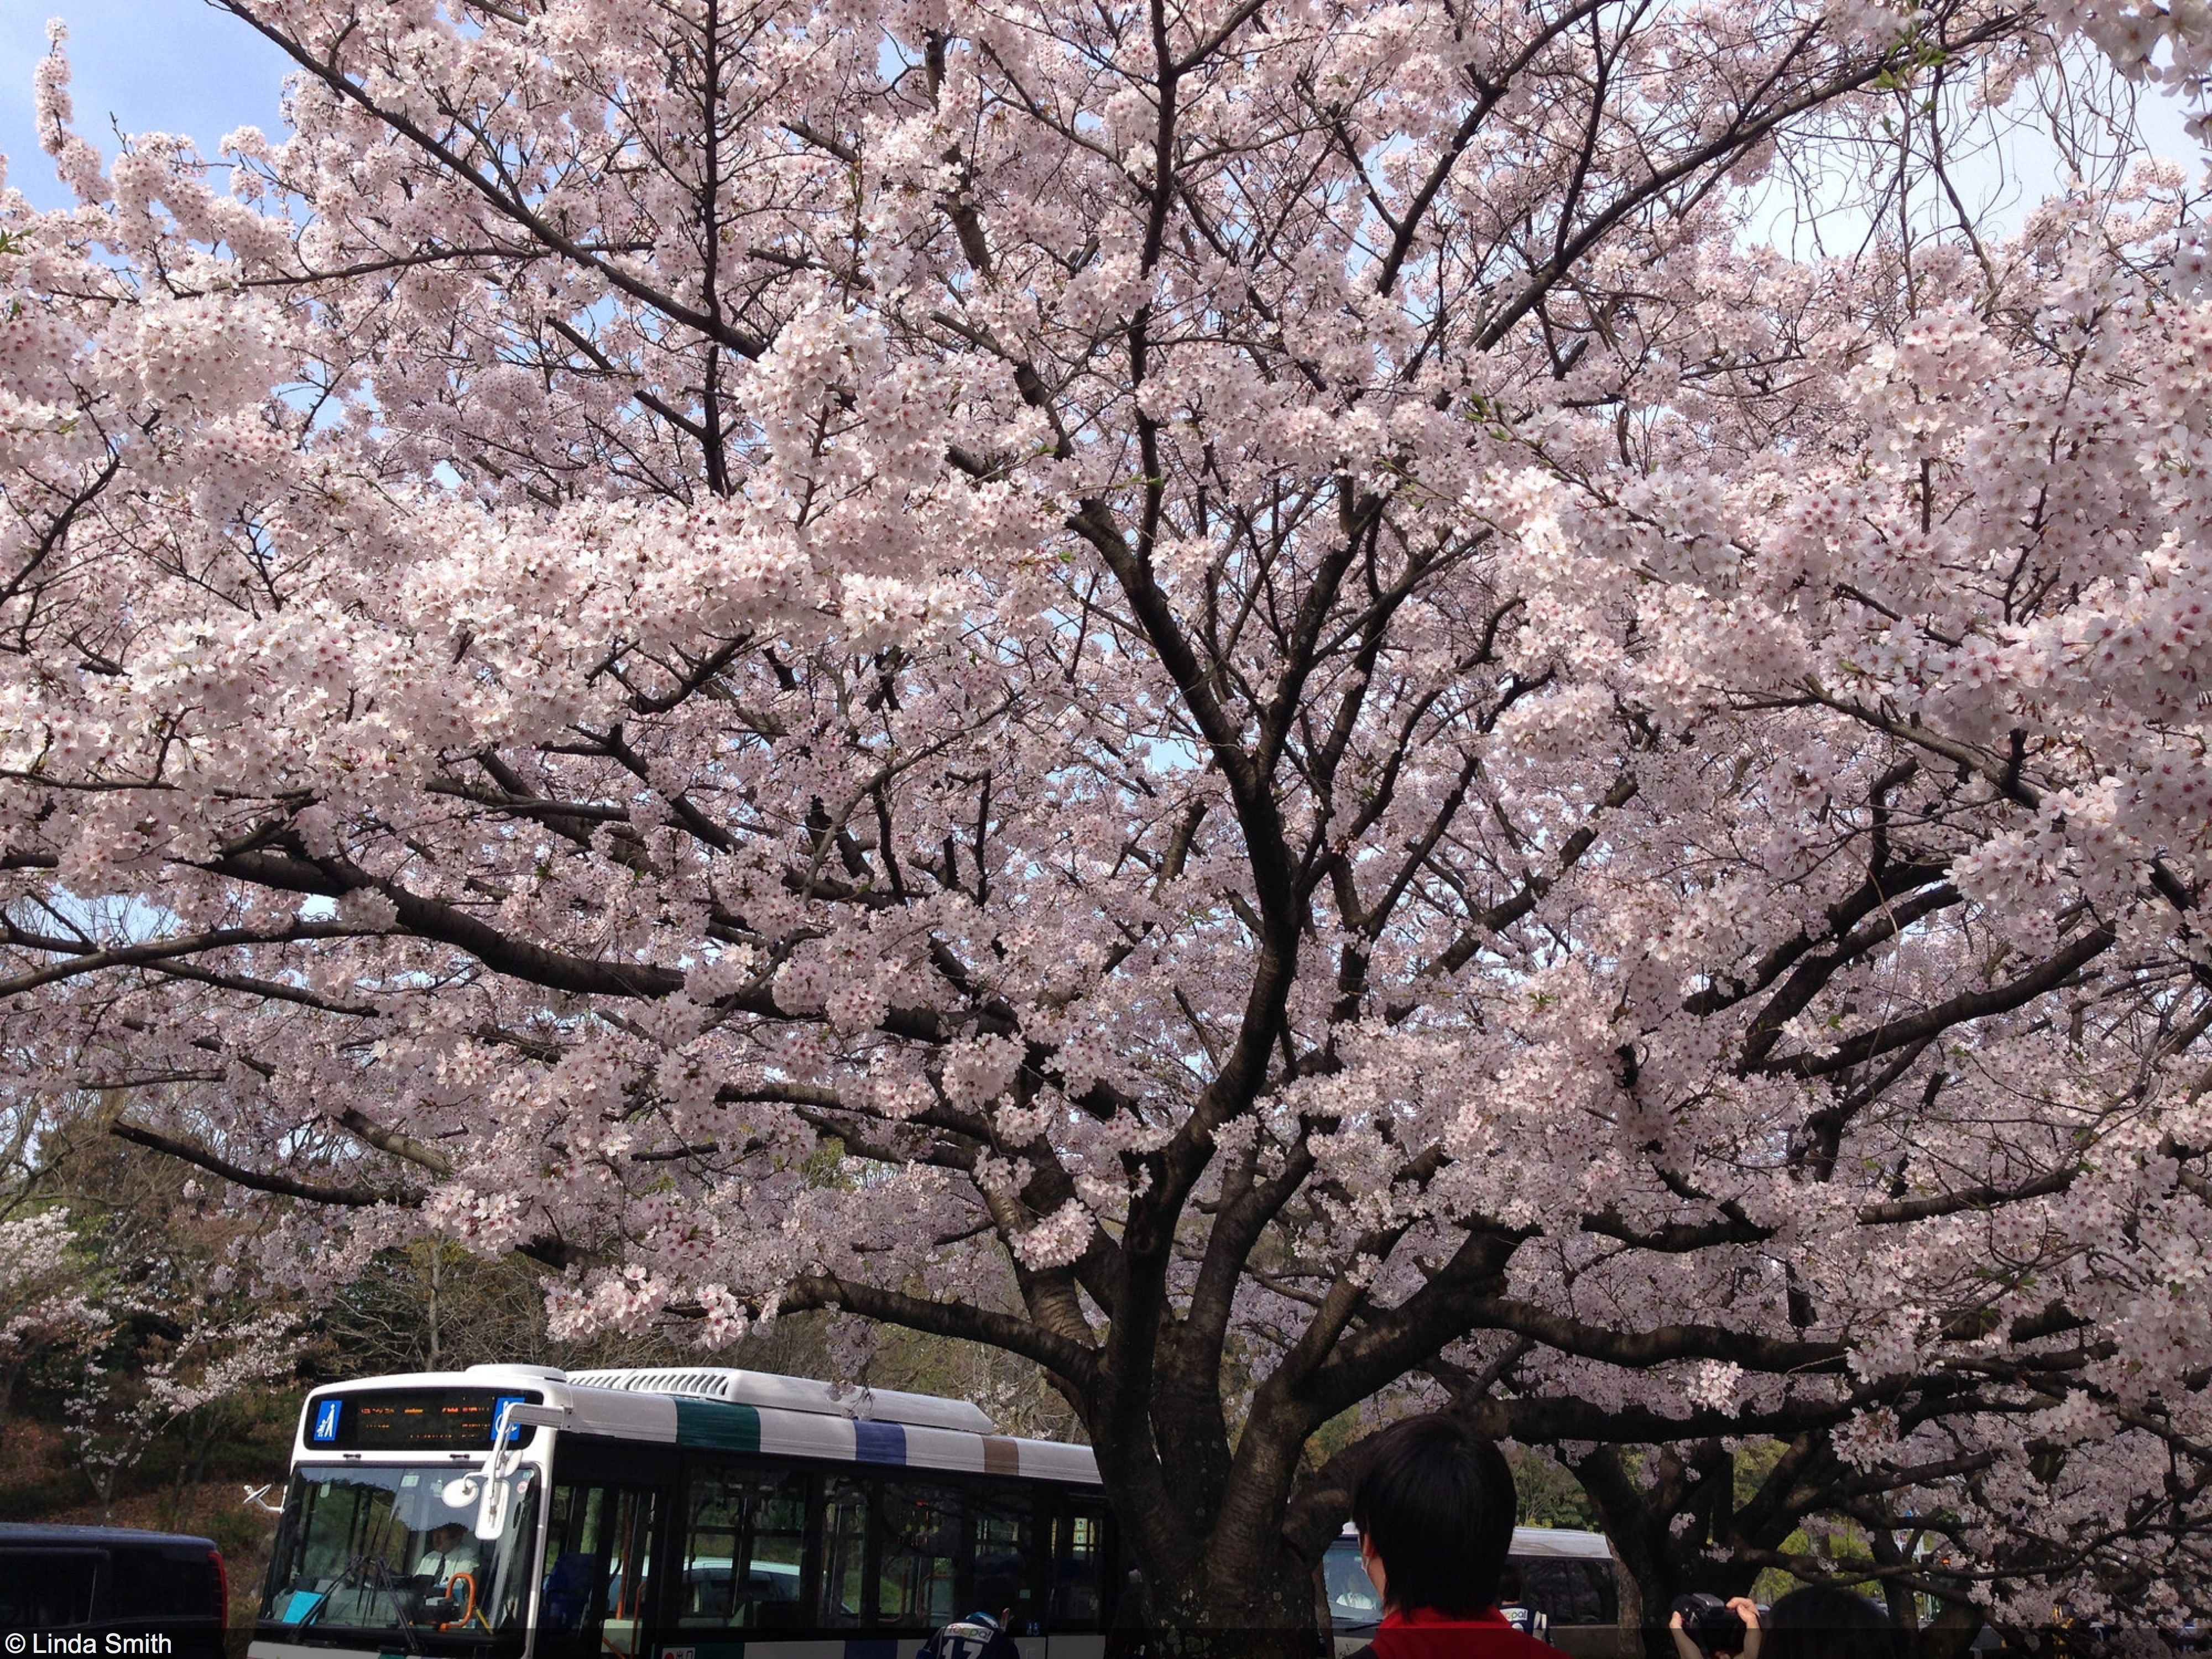 There's nothing quite like the cherry blossoms in spring.